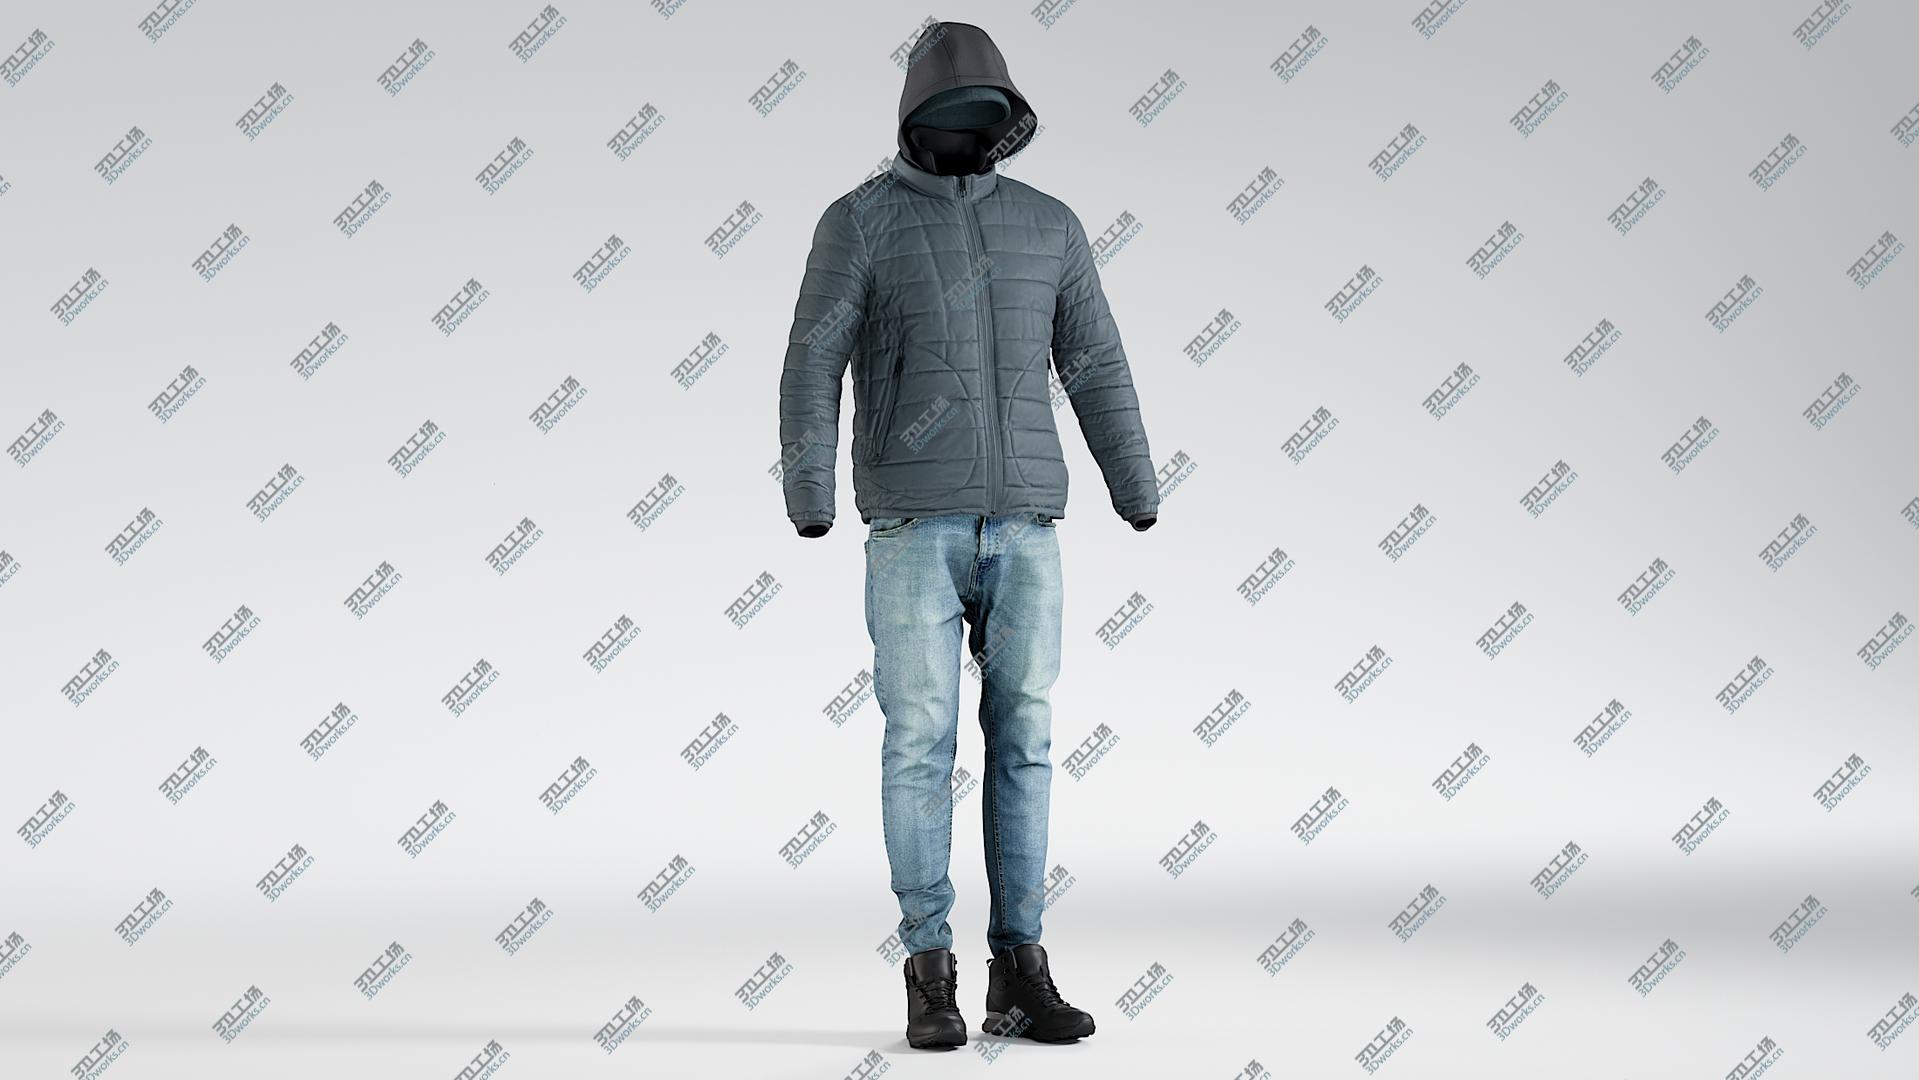 images/goods_img/20210313/3D Men's Down Jacket with Jeans, Jacket, Hat and Boots/5.jpg